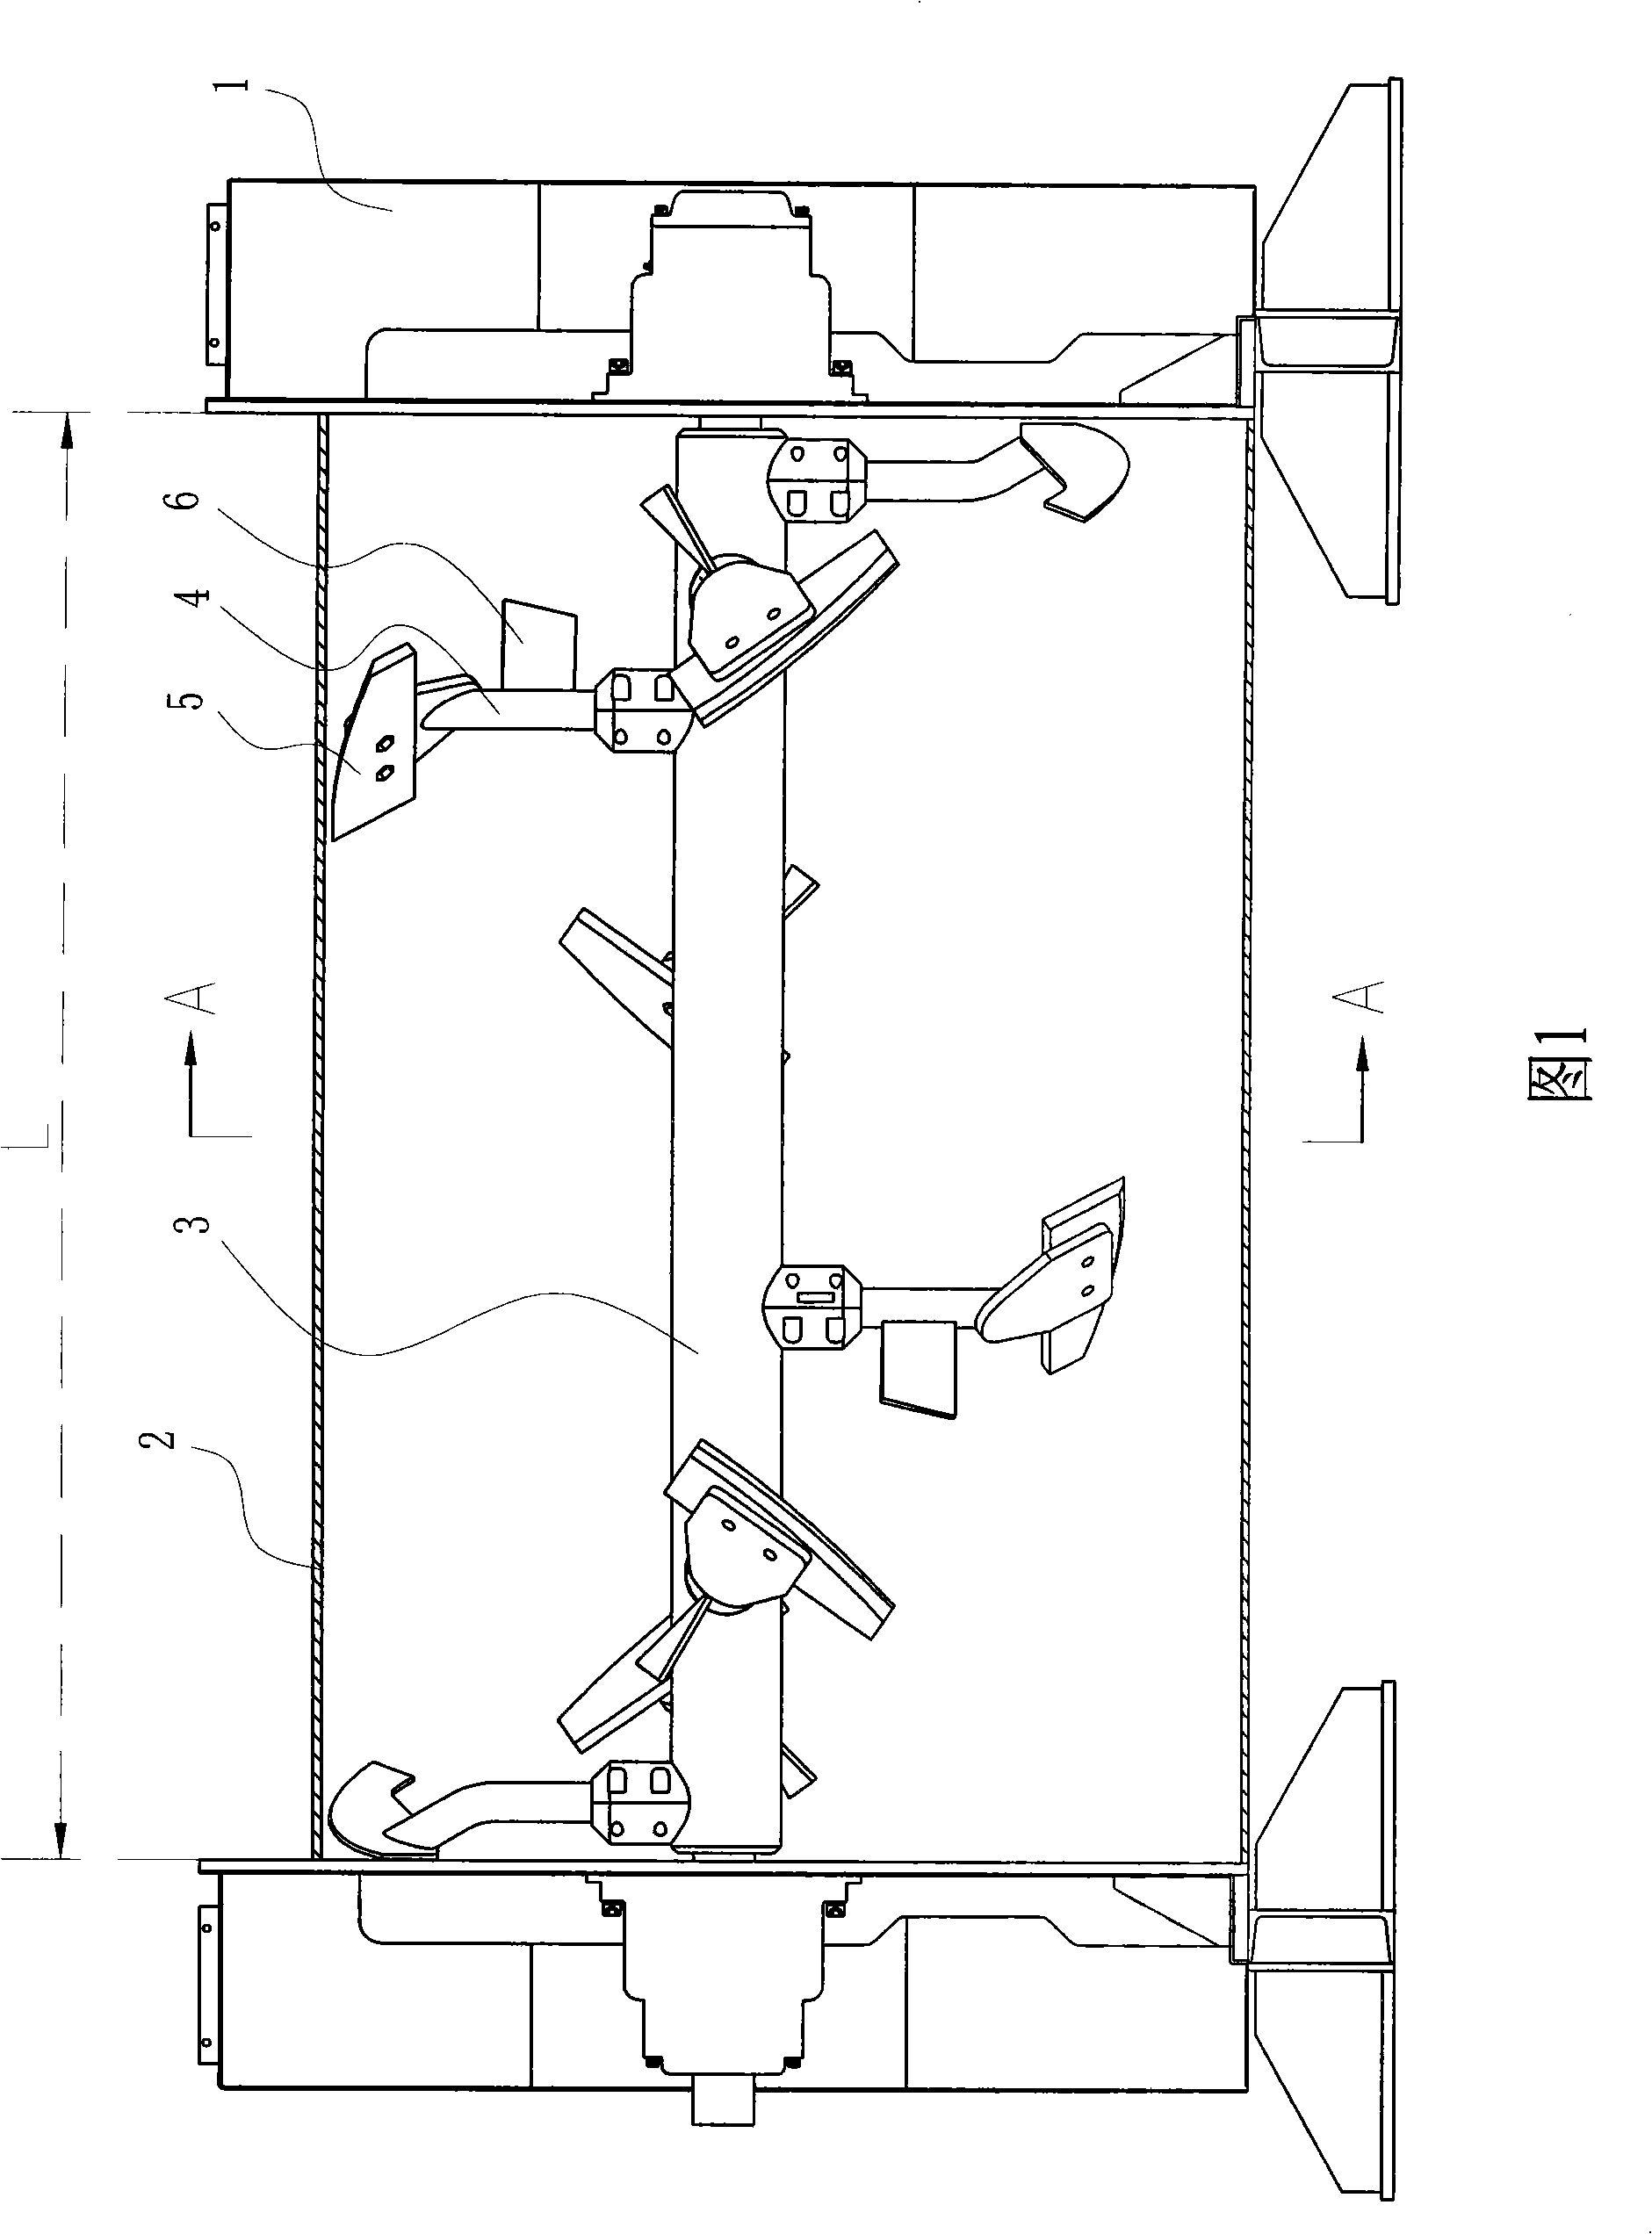 Horizontal type mixer with barrel configuration determined according to Froude number